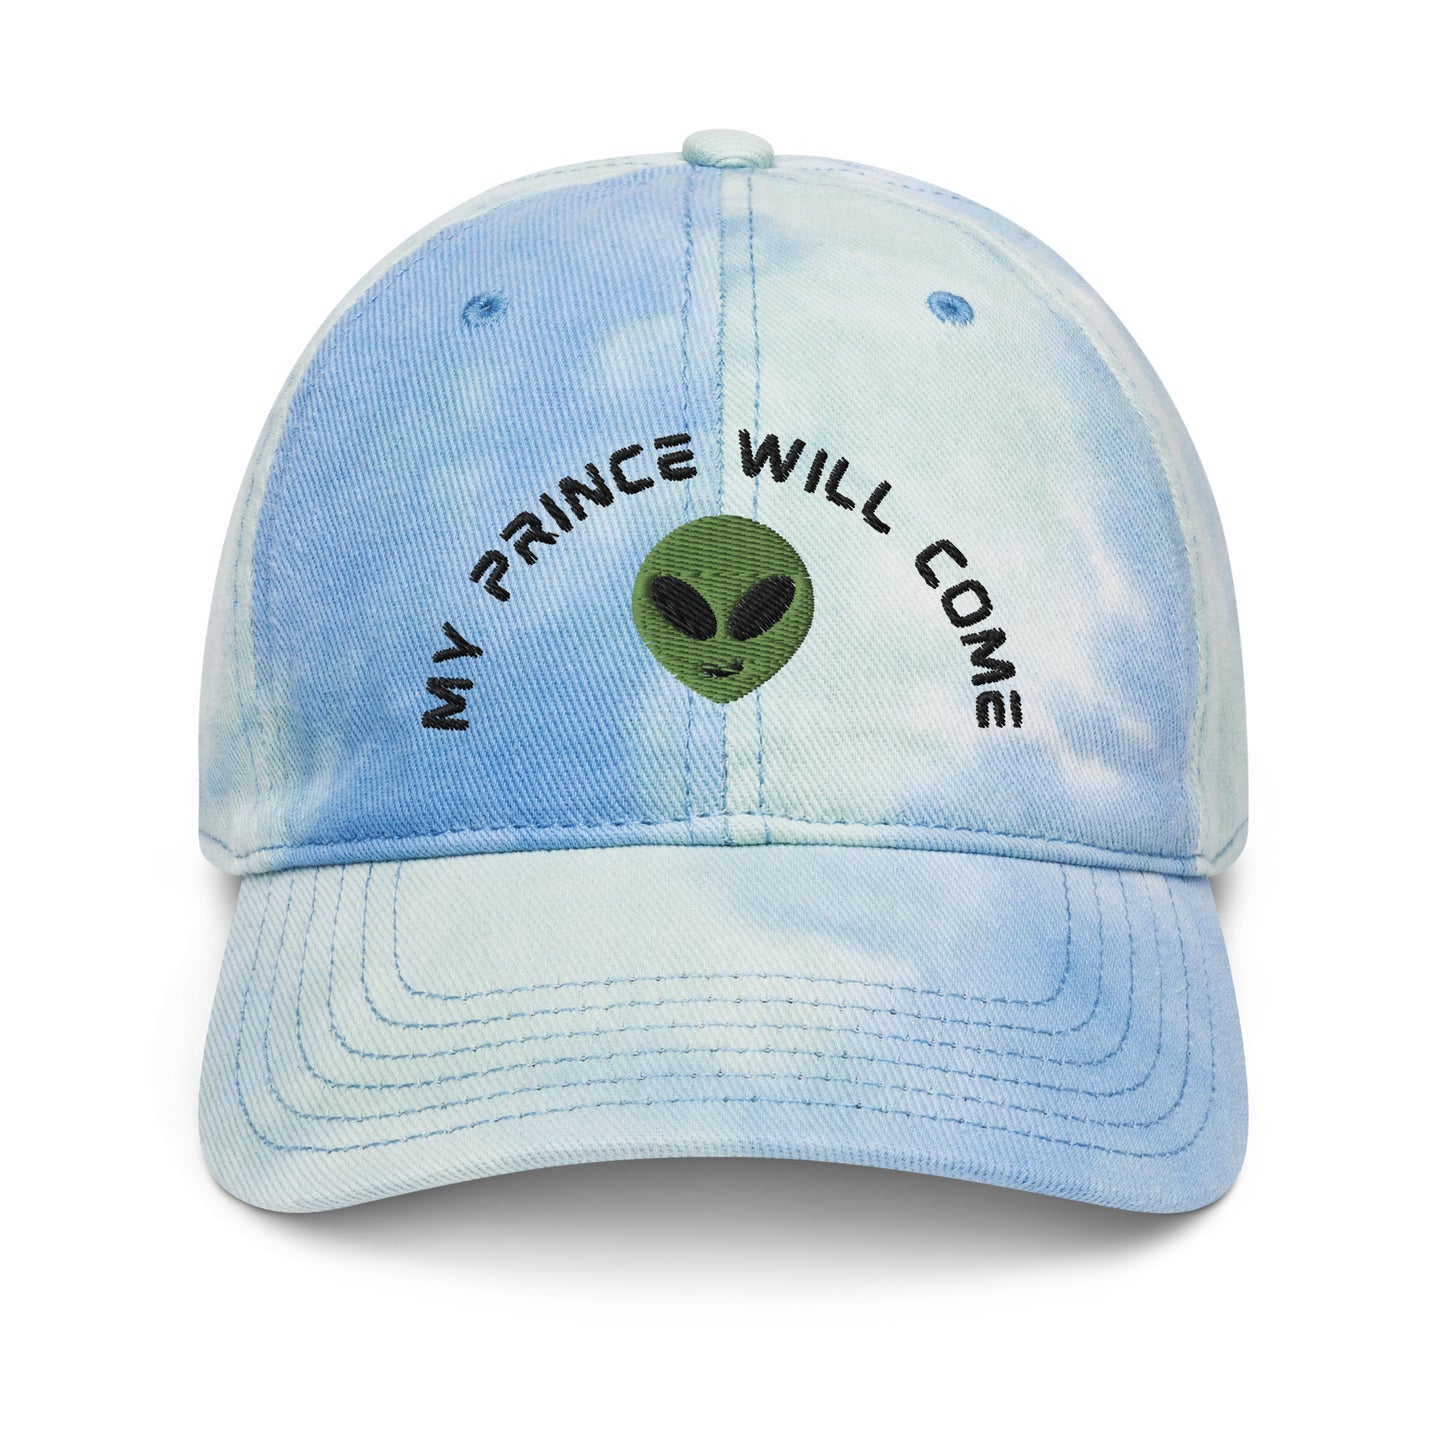 My Prince Will Come Alien Romance Embroidered Tie Dye Hat